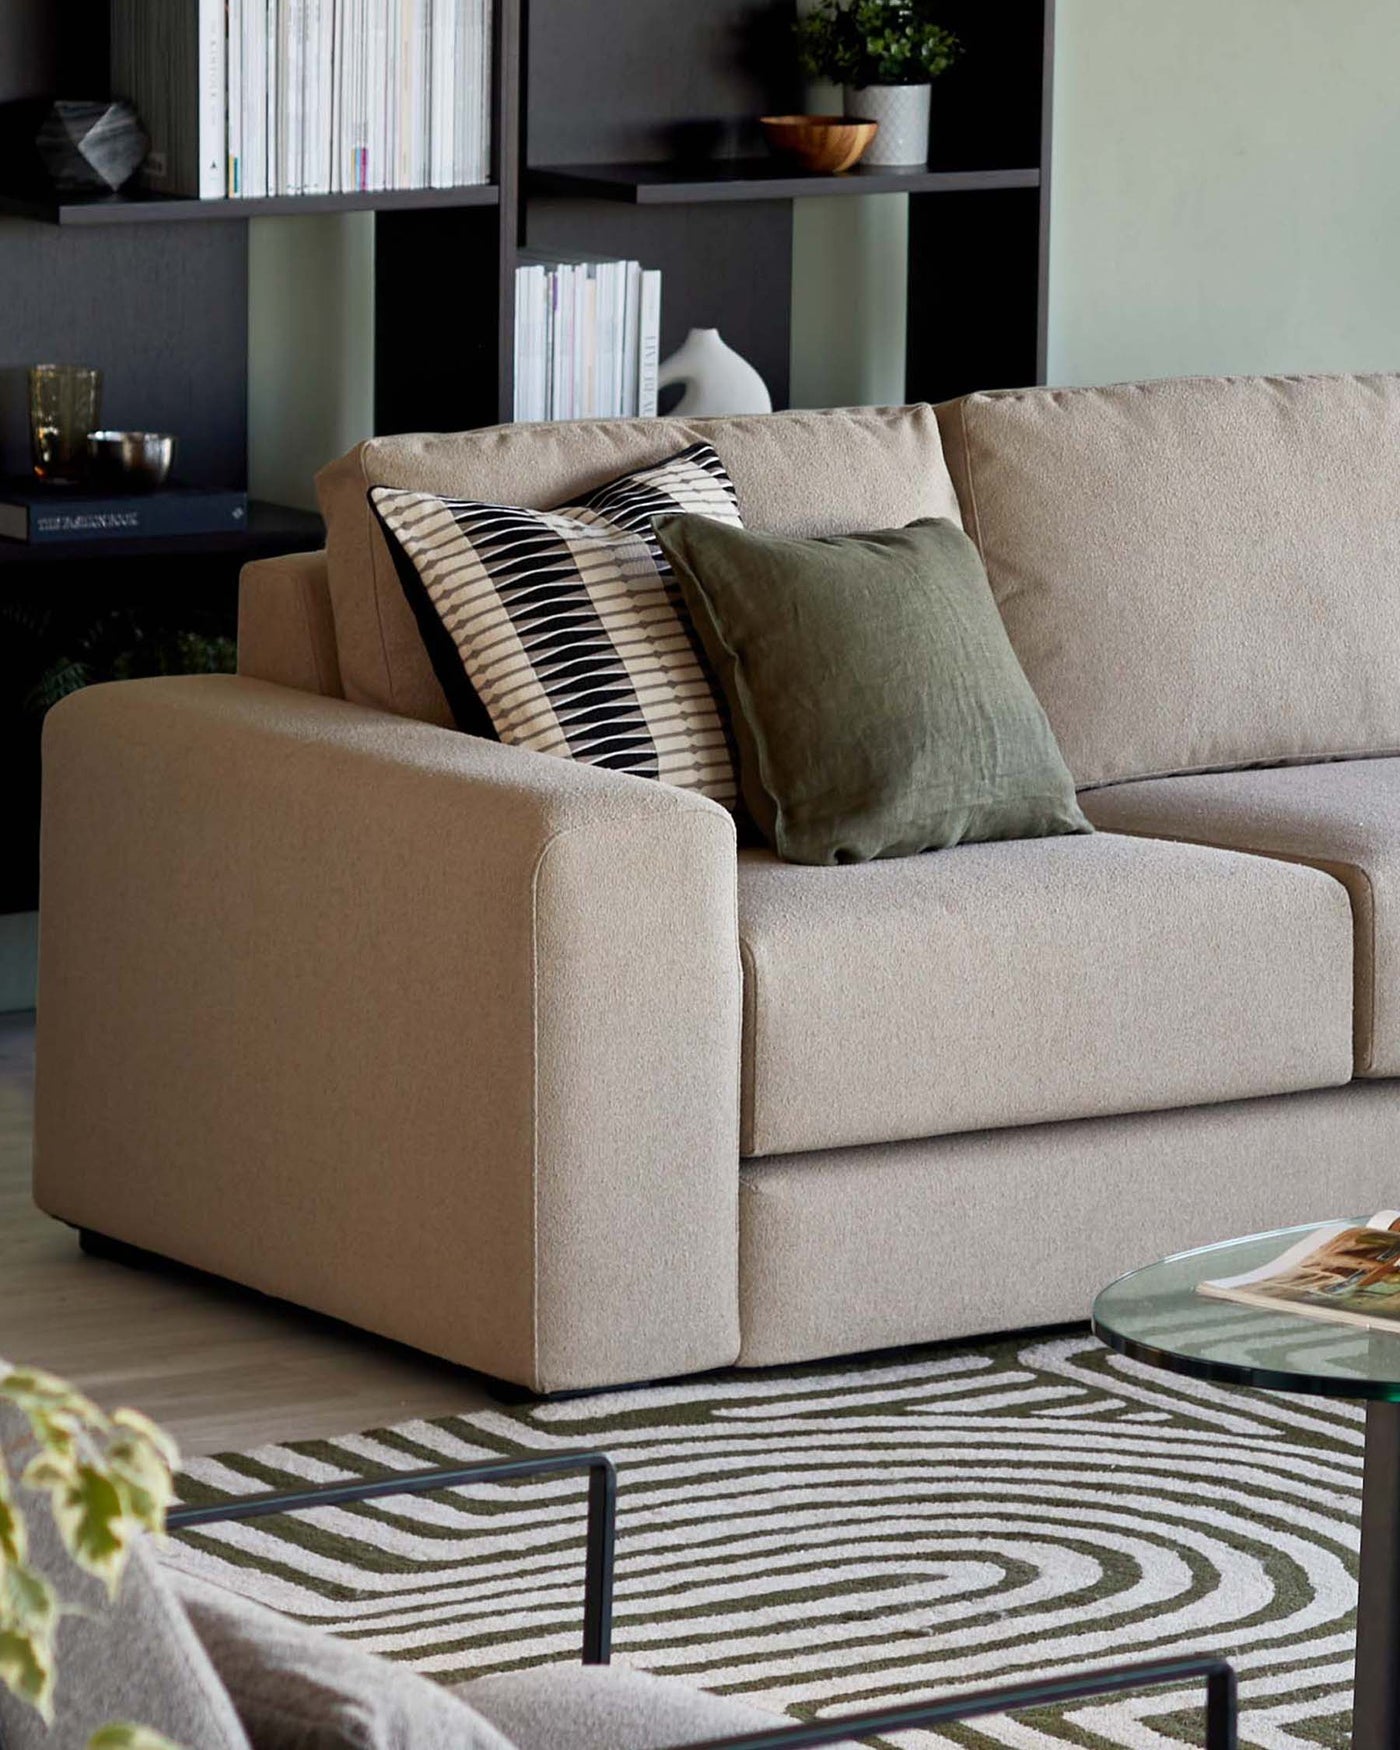 A contemporary beige fabric sofa with rounded armrests and clean lines, accented by striped and solid green throw pillows. A glass coffee table with a minimalist black metal frame is positioned in the foreground, and behind the sofa stands a dark bookcase filled with assorted books and decorative items. The furniture is set upon a patterned area rug with a geometric design.